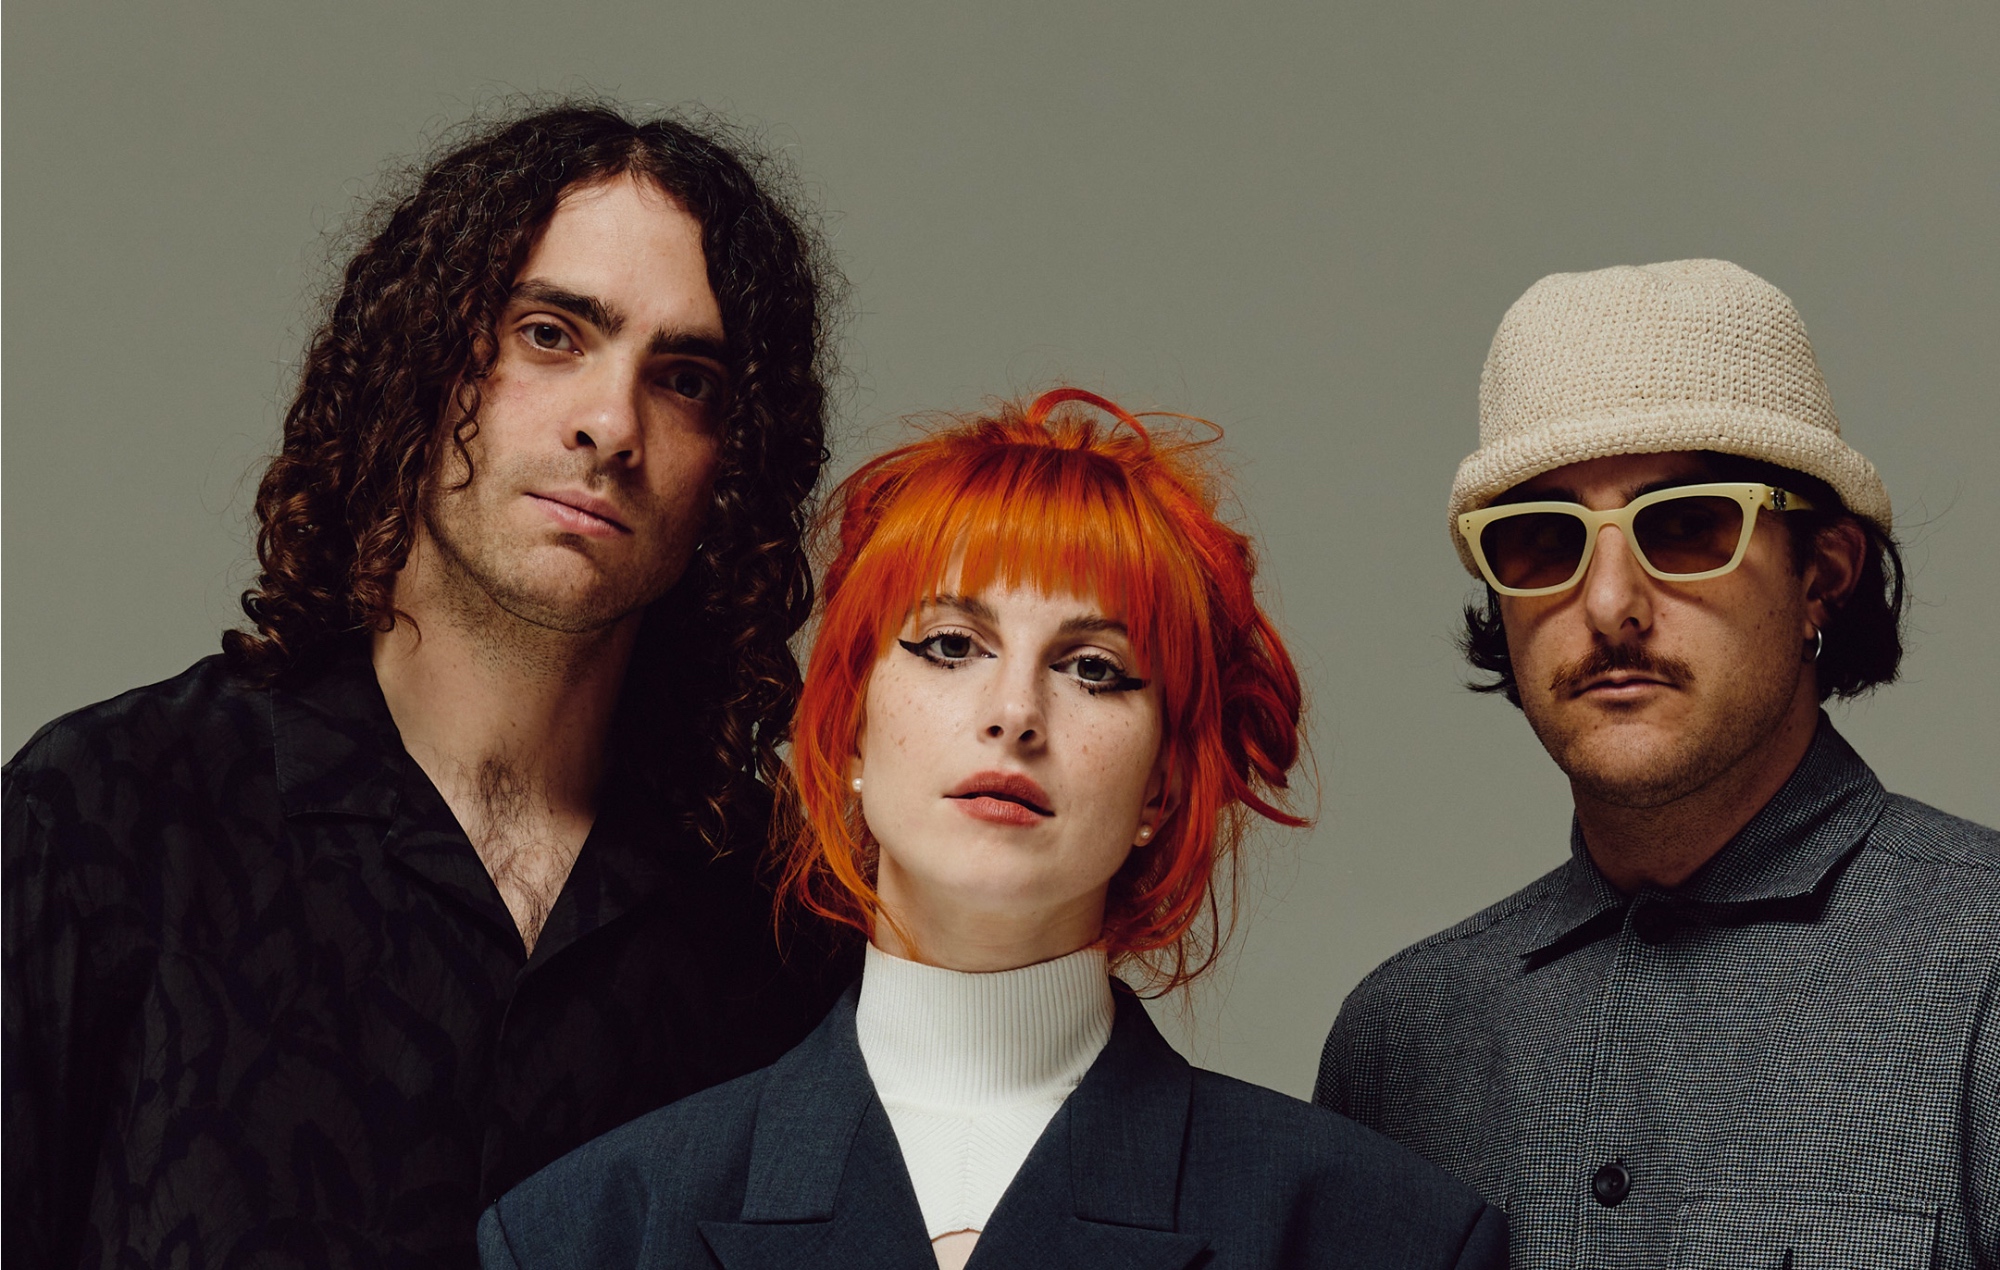 Paramore’s Hayley Williams says people look at ’00s emo ‘through rose-colored glasses’